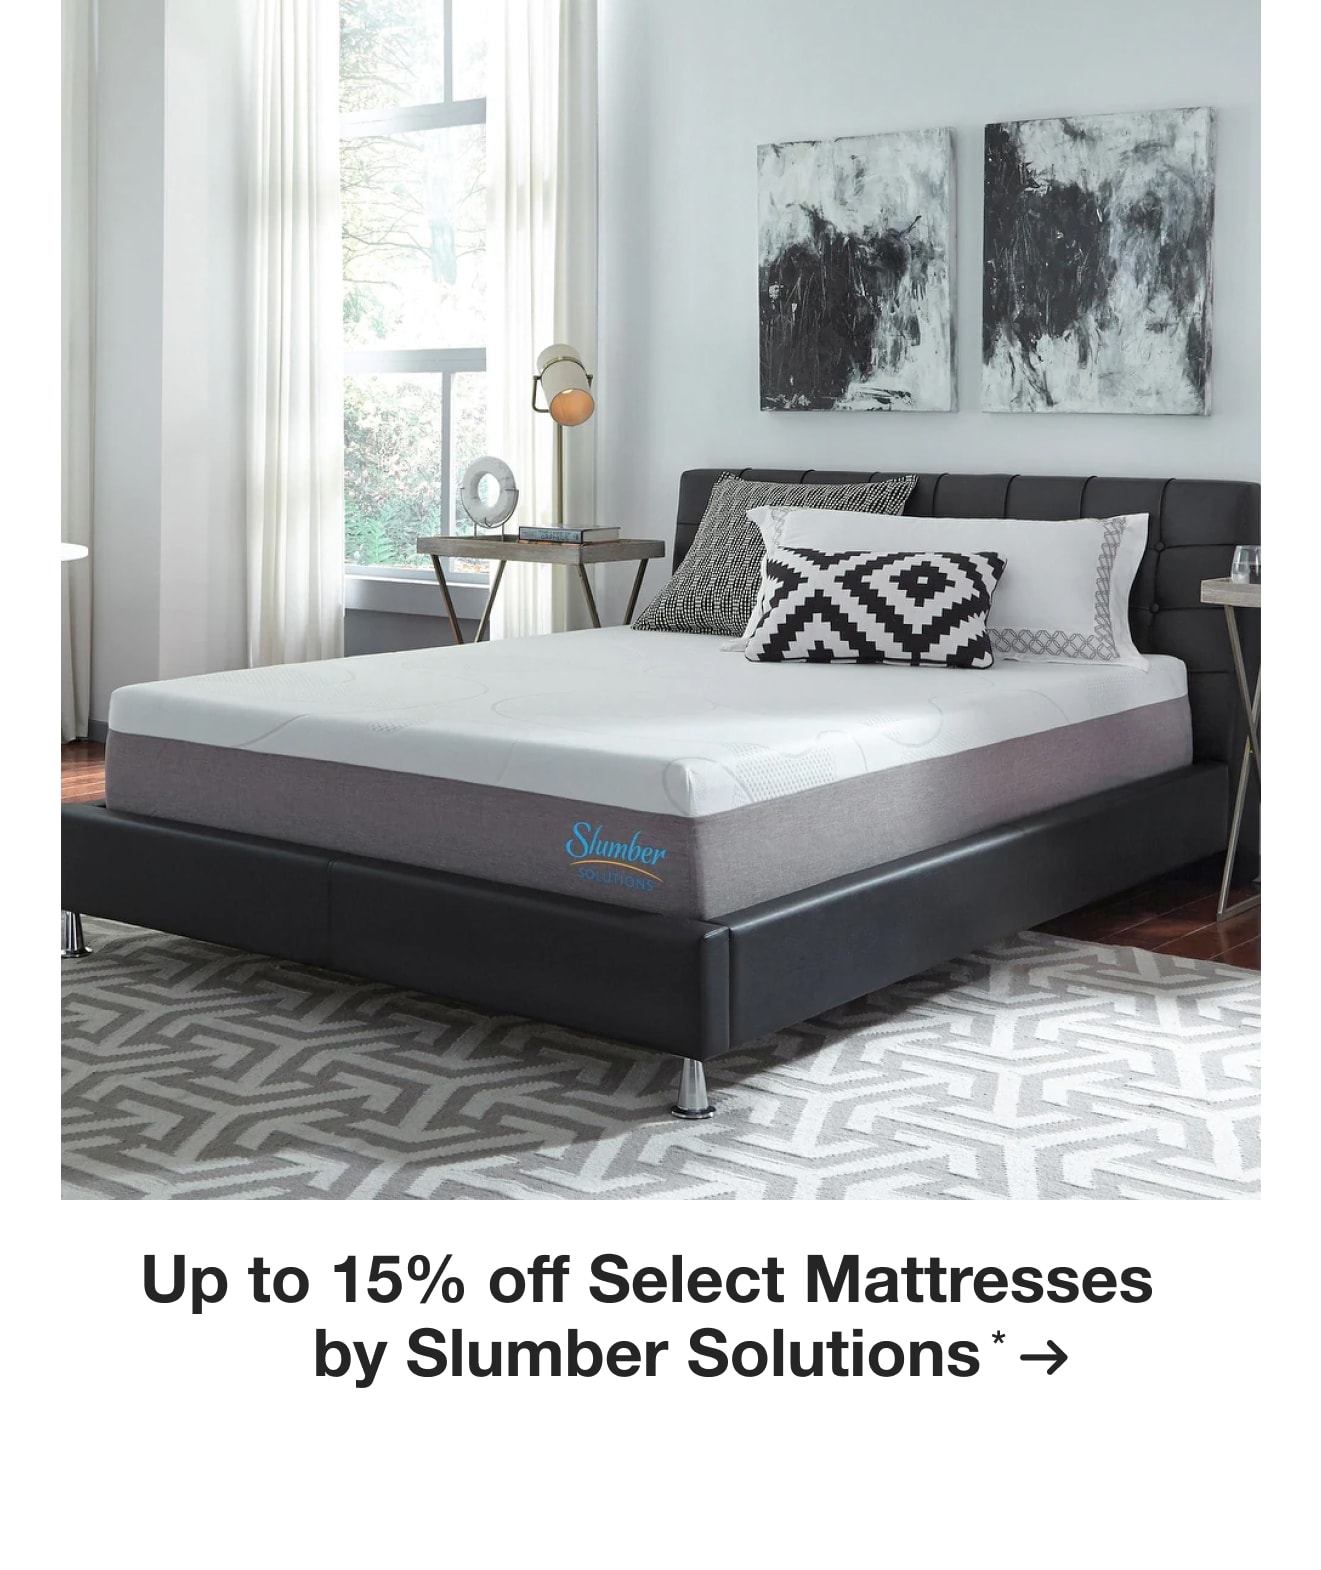 Up to 15% off Select Mattresses by Slumber Solutions*